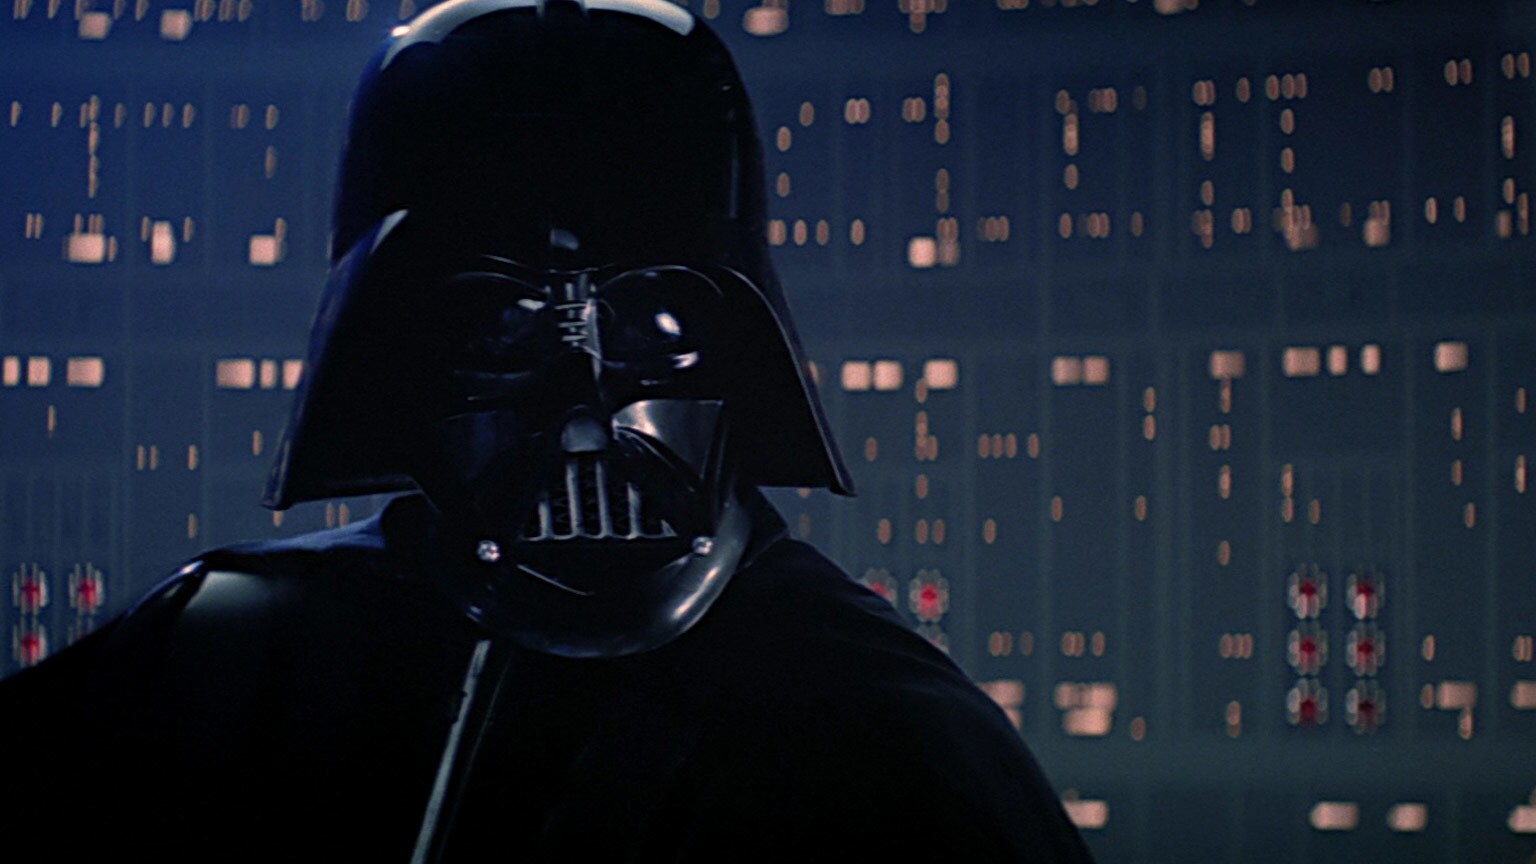 Quiz: Match the Quote to the Star Wars Villain!